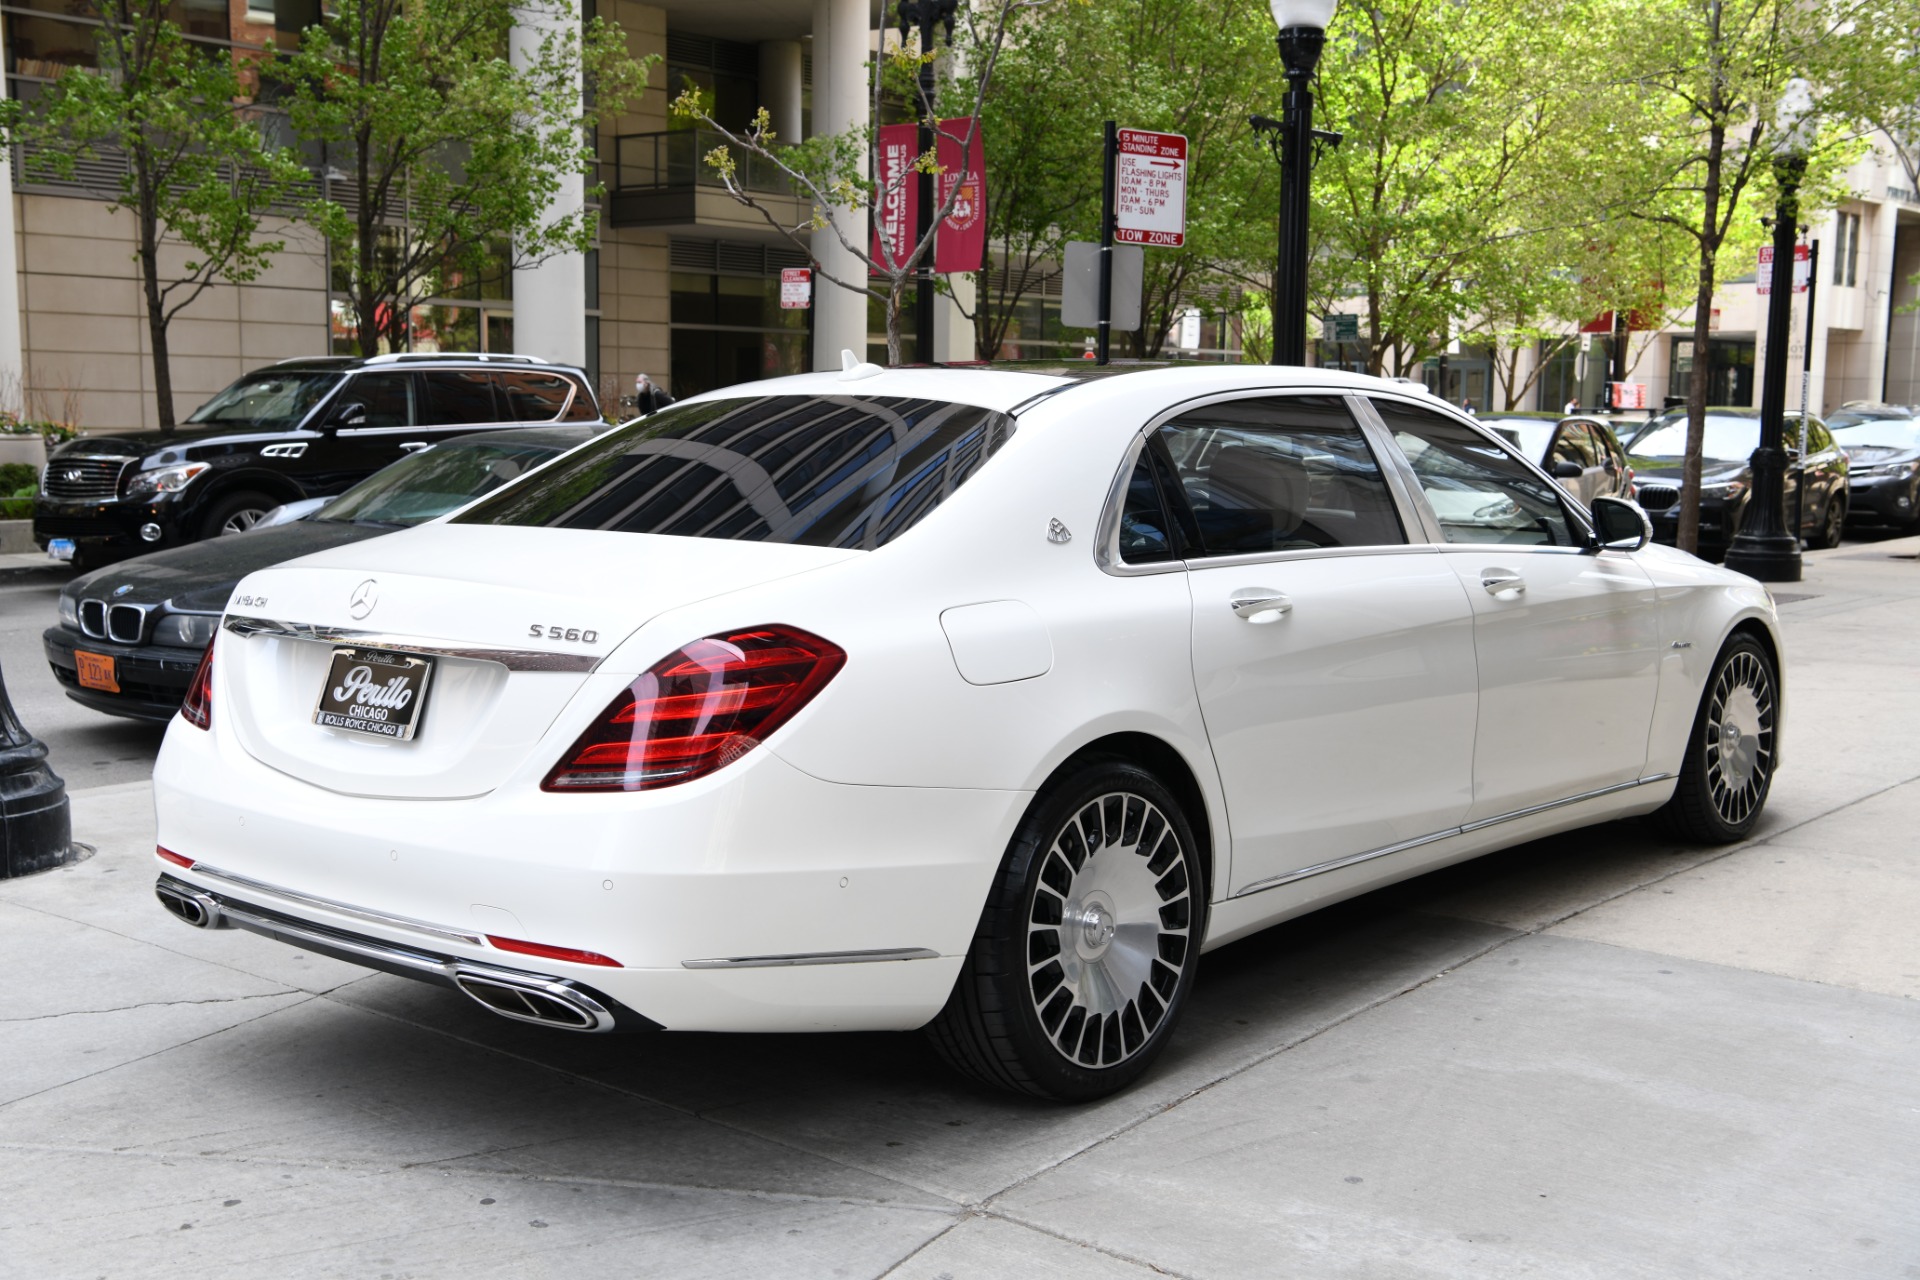 2020 Mercedes-Benz S-Class Mercedes-Maybach S 560 4MATIC Stock # GC3237 for  sale near Chicago, IL | IL Mercedes-Benz Dealer